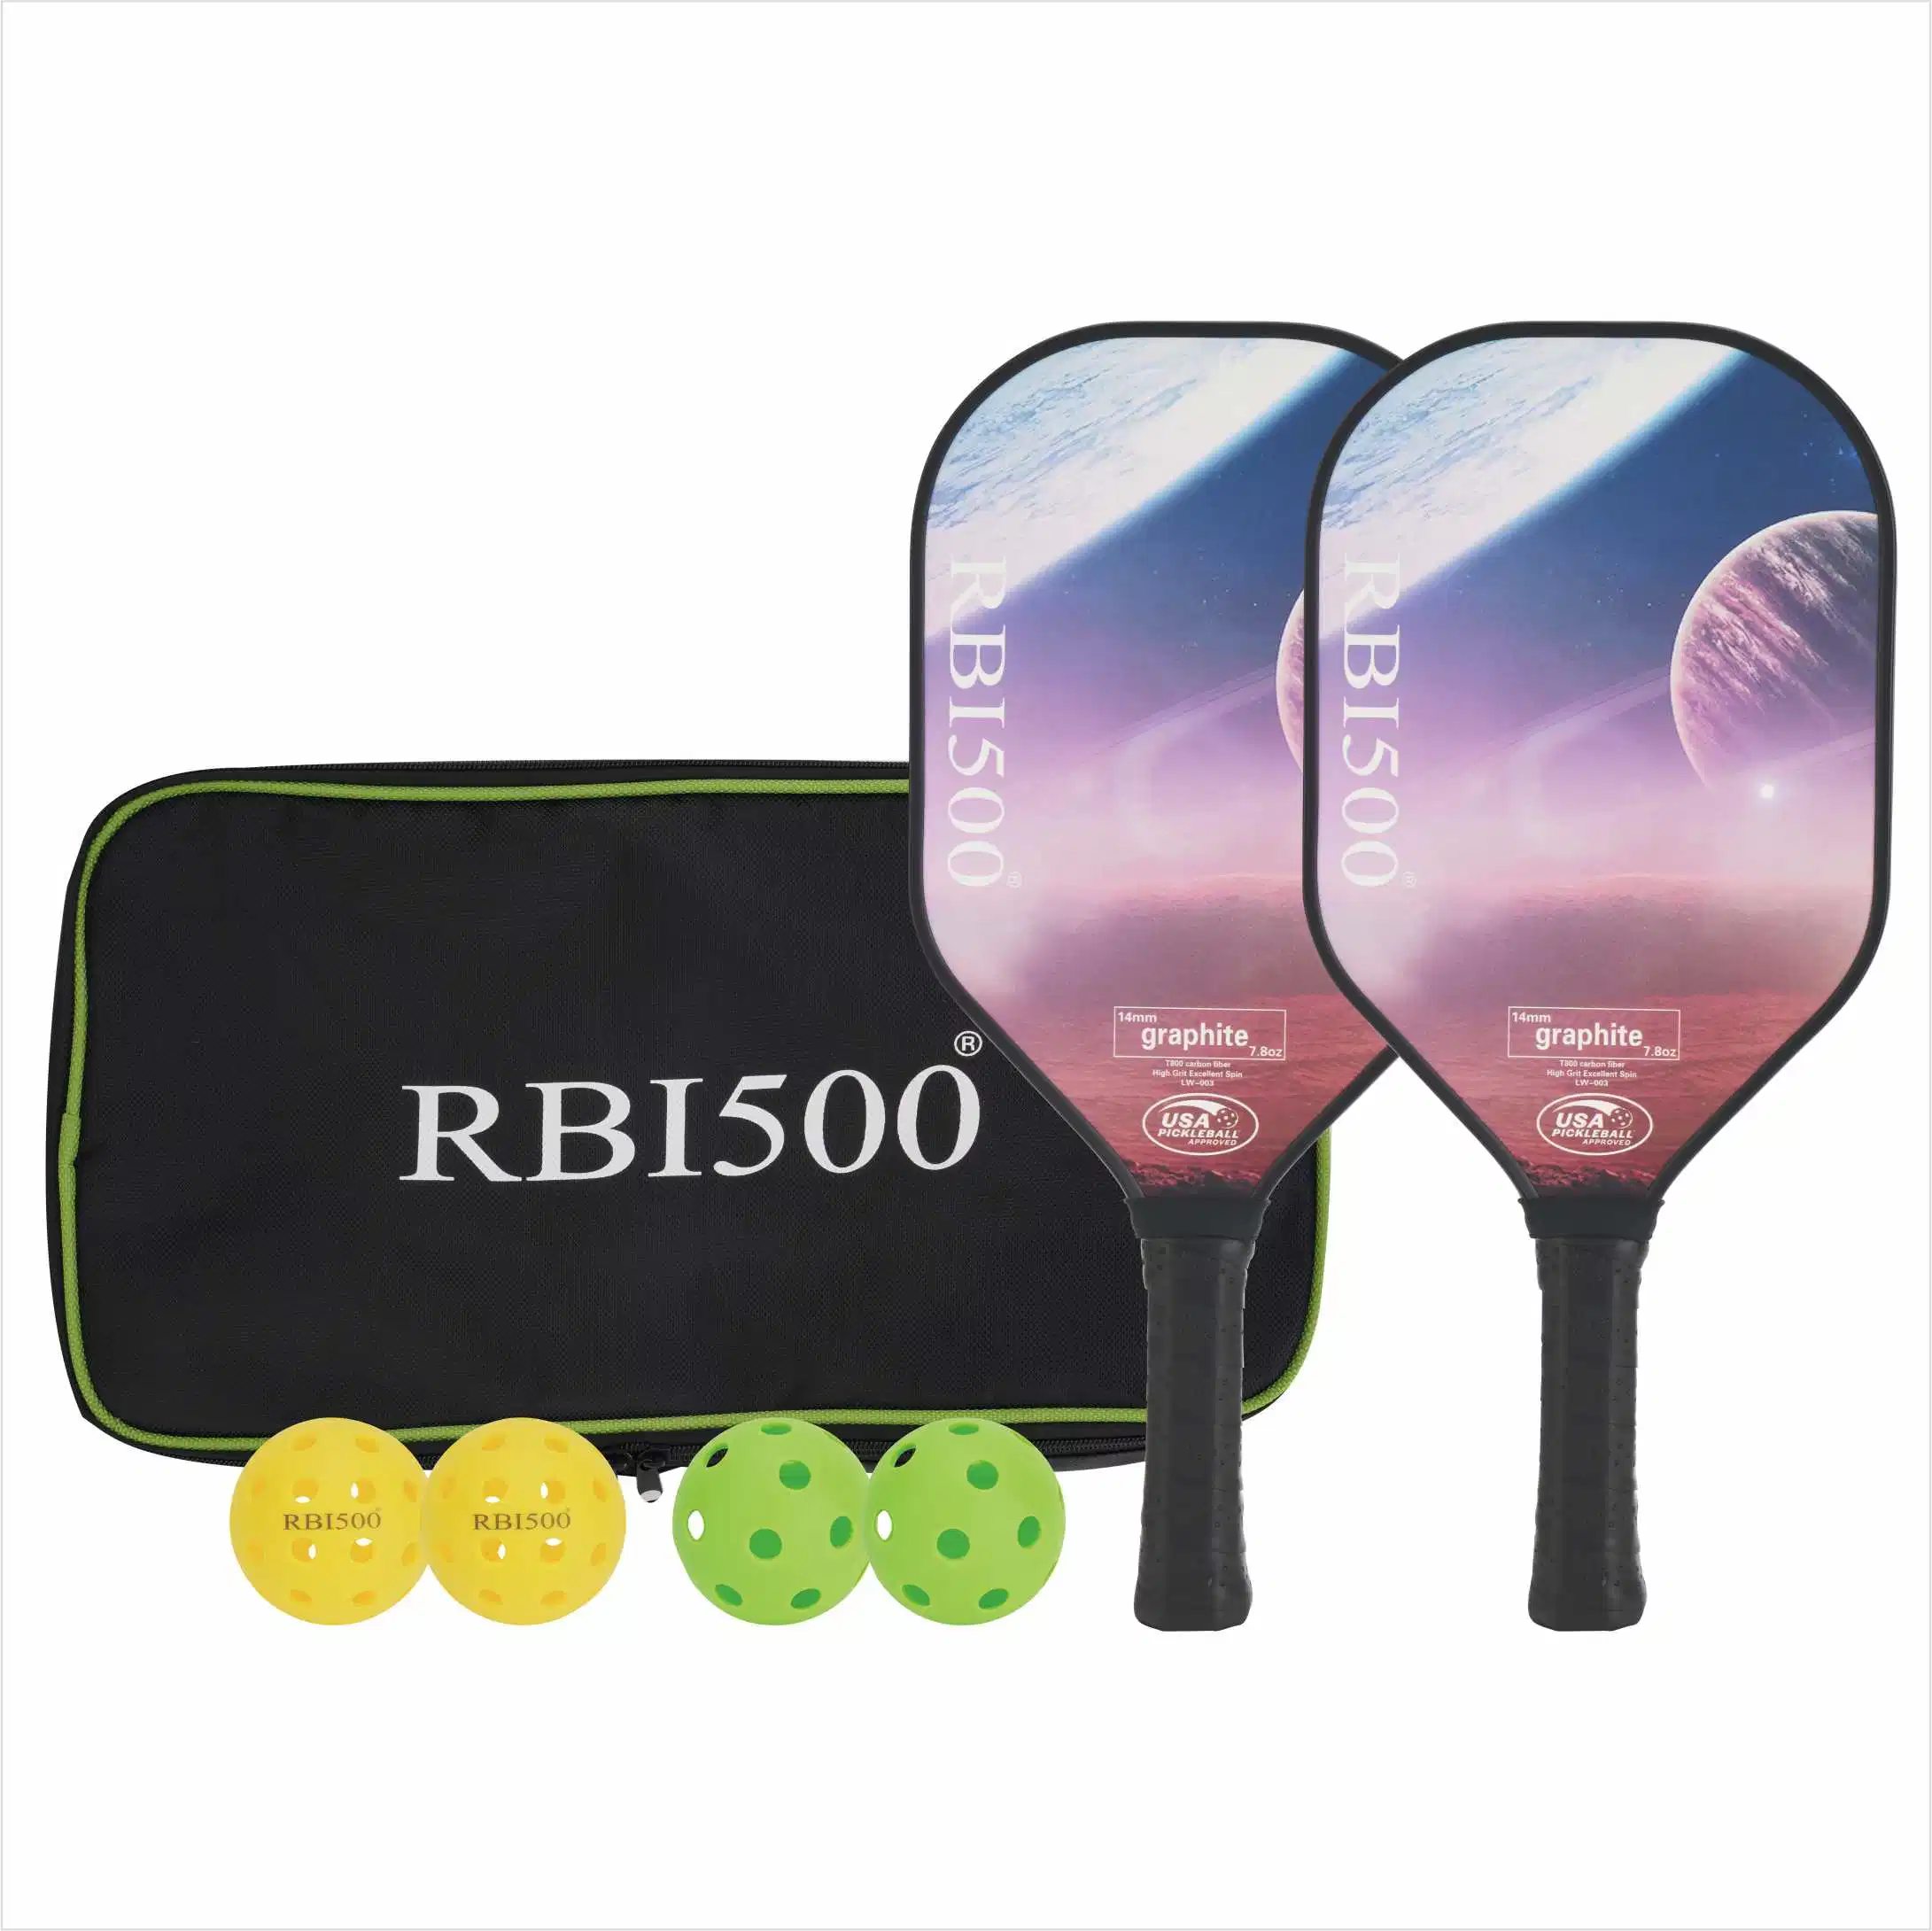 Usapa Approved Rbi500 T800 Carbon Fiber Pickleball Paddle Set with 2PCS Paddles, 4PCS Ball and a Bag